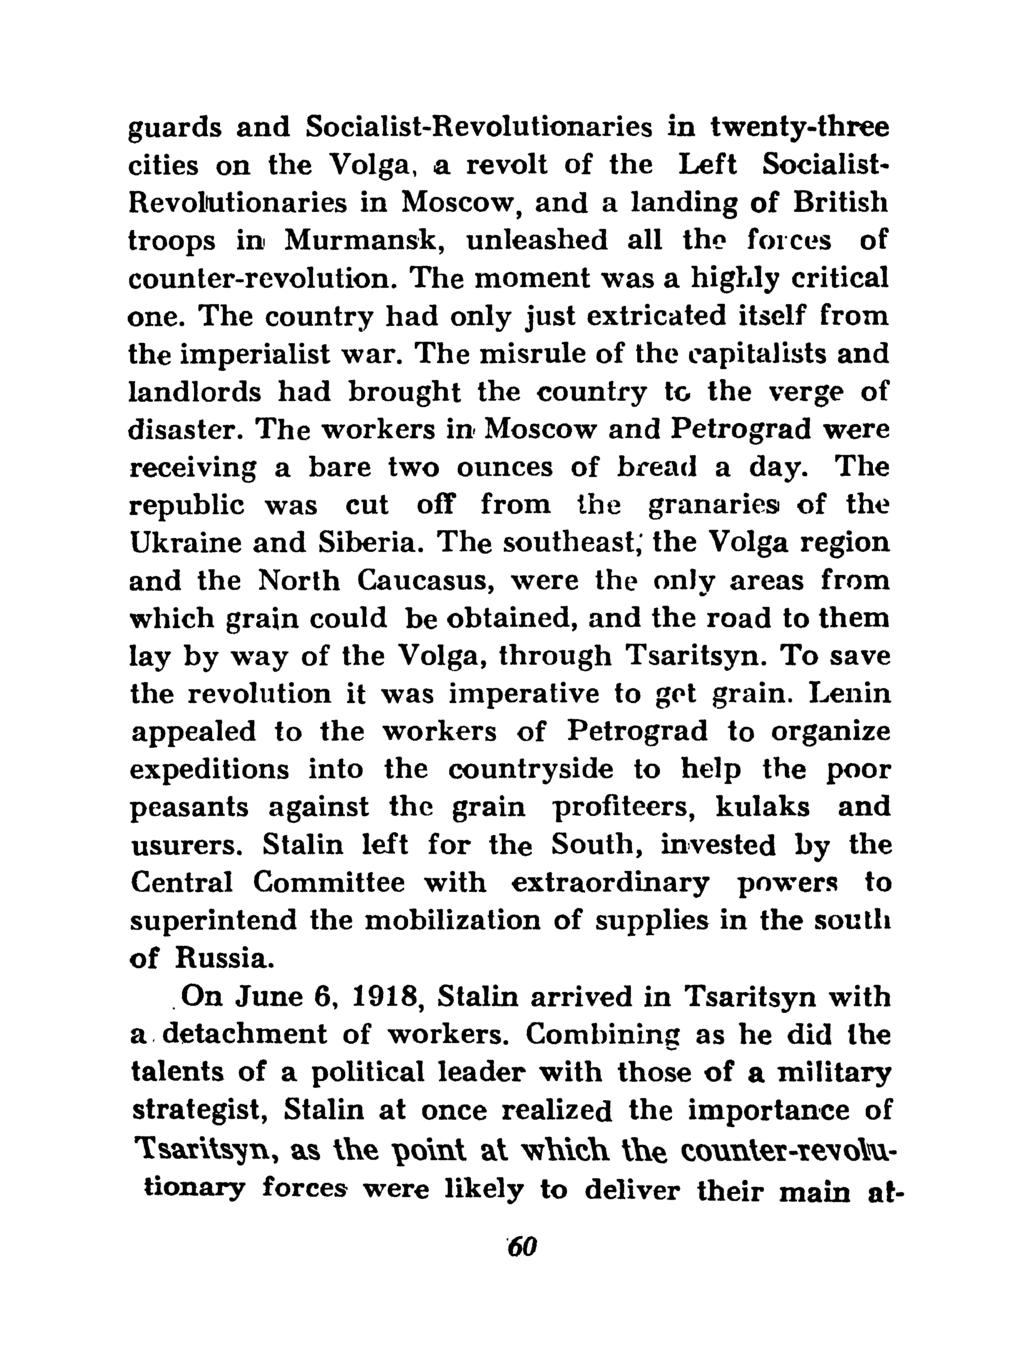 guards and Socialist-Revolutionaries in twenty-three cities on the Volga, a revolt of the Left Socialist- Revolutionaries in Moscow, and a landing of British troops in Murmansk, unleashed all tho